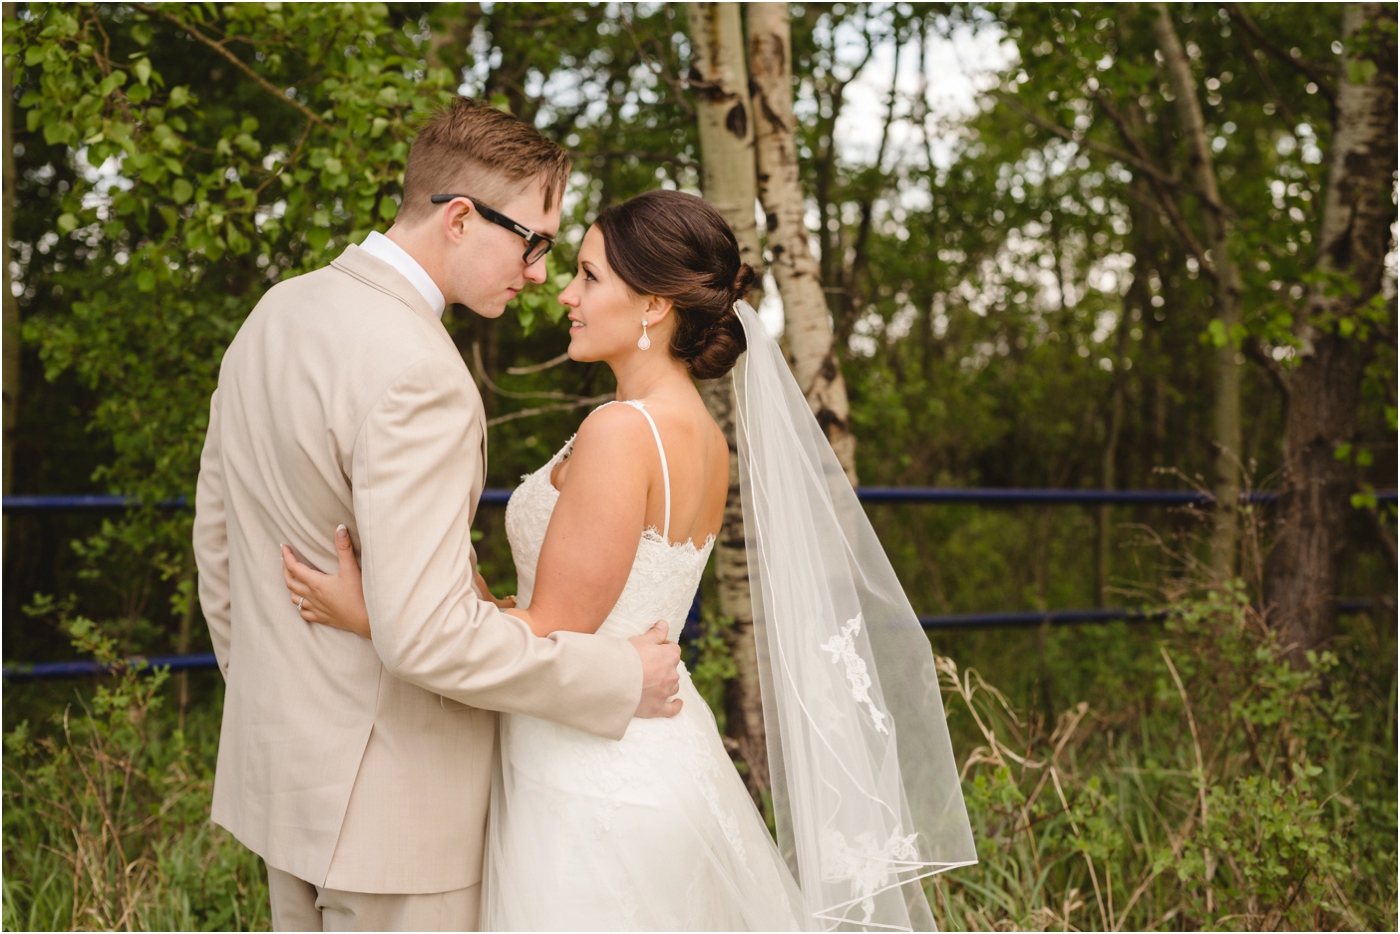 carlyle-saskatchewan-wedding-photographer-coral-gold-pink-romantic-spring-prairie-place-arcola-bride-groom-lace-diamond-ring-woodsy-cherry-tree-blossom-tan-suit-pictures-101